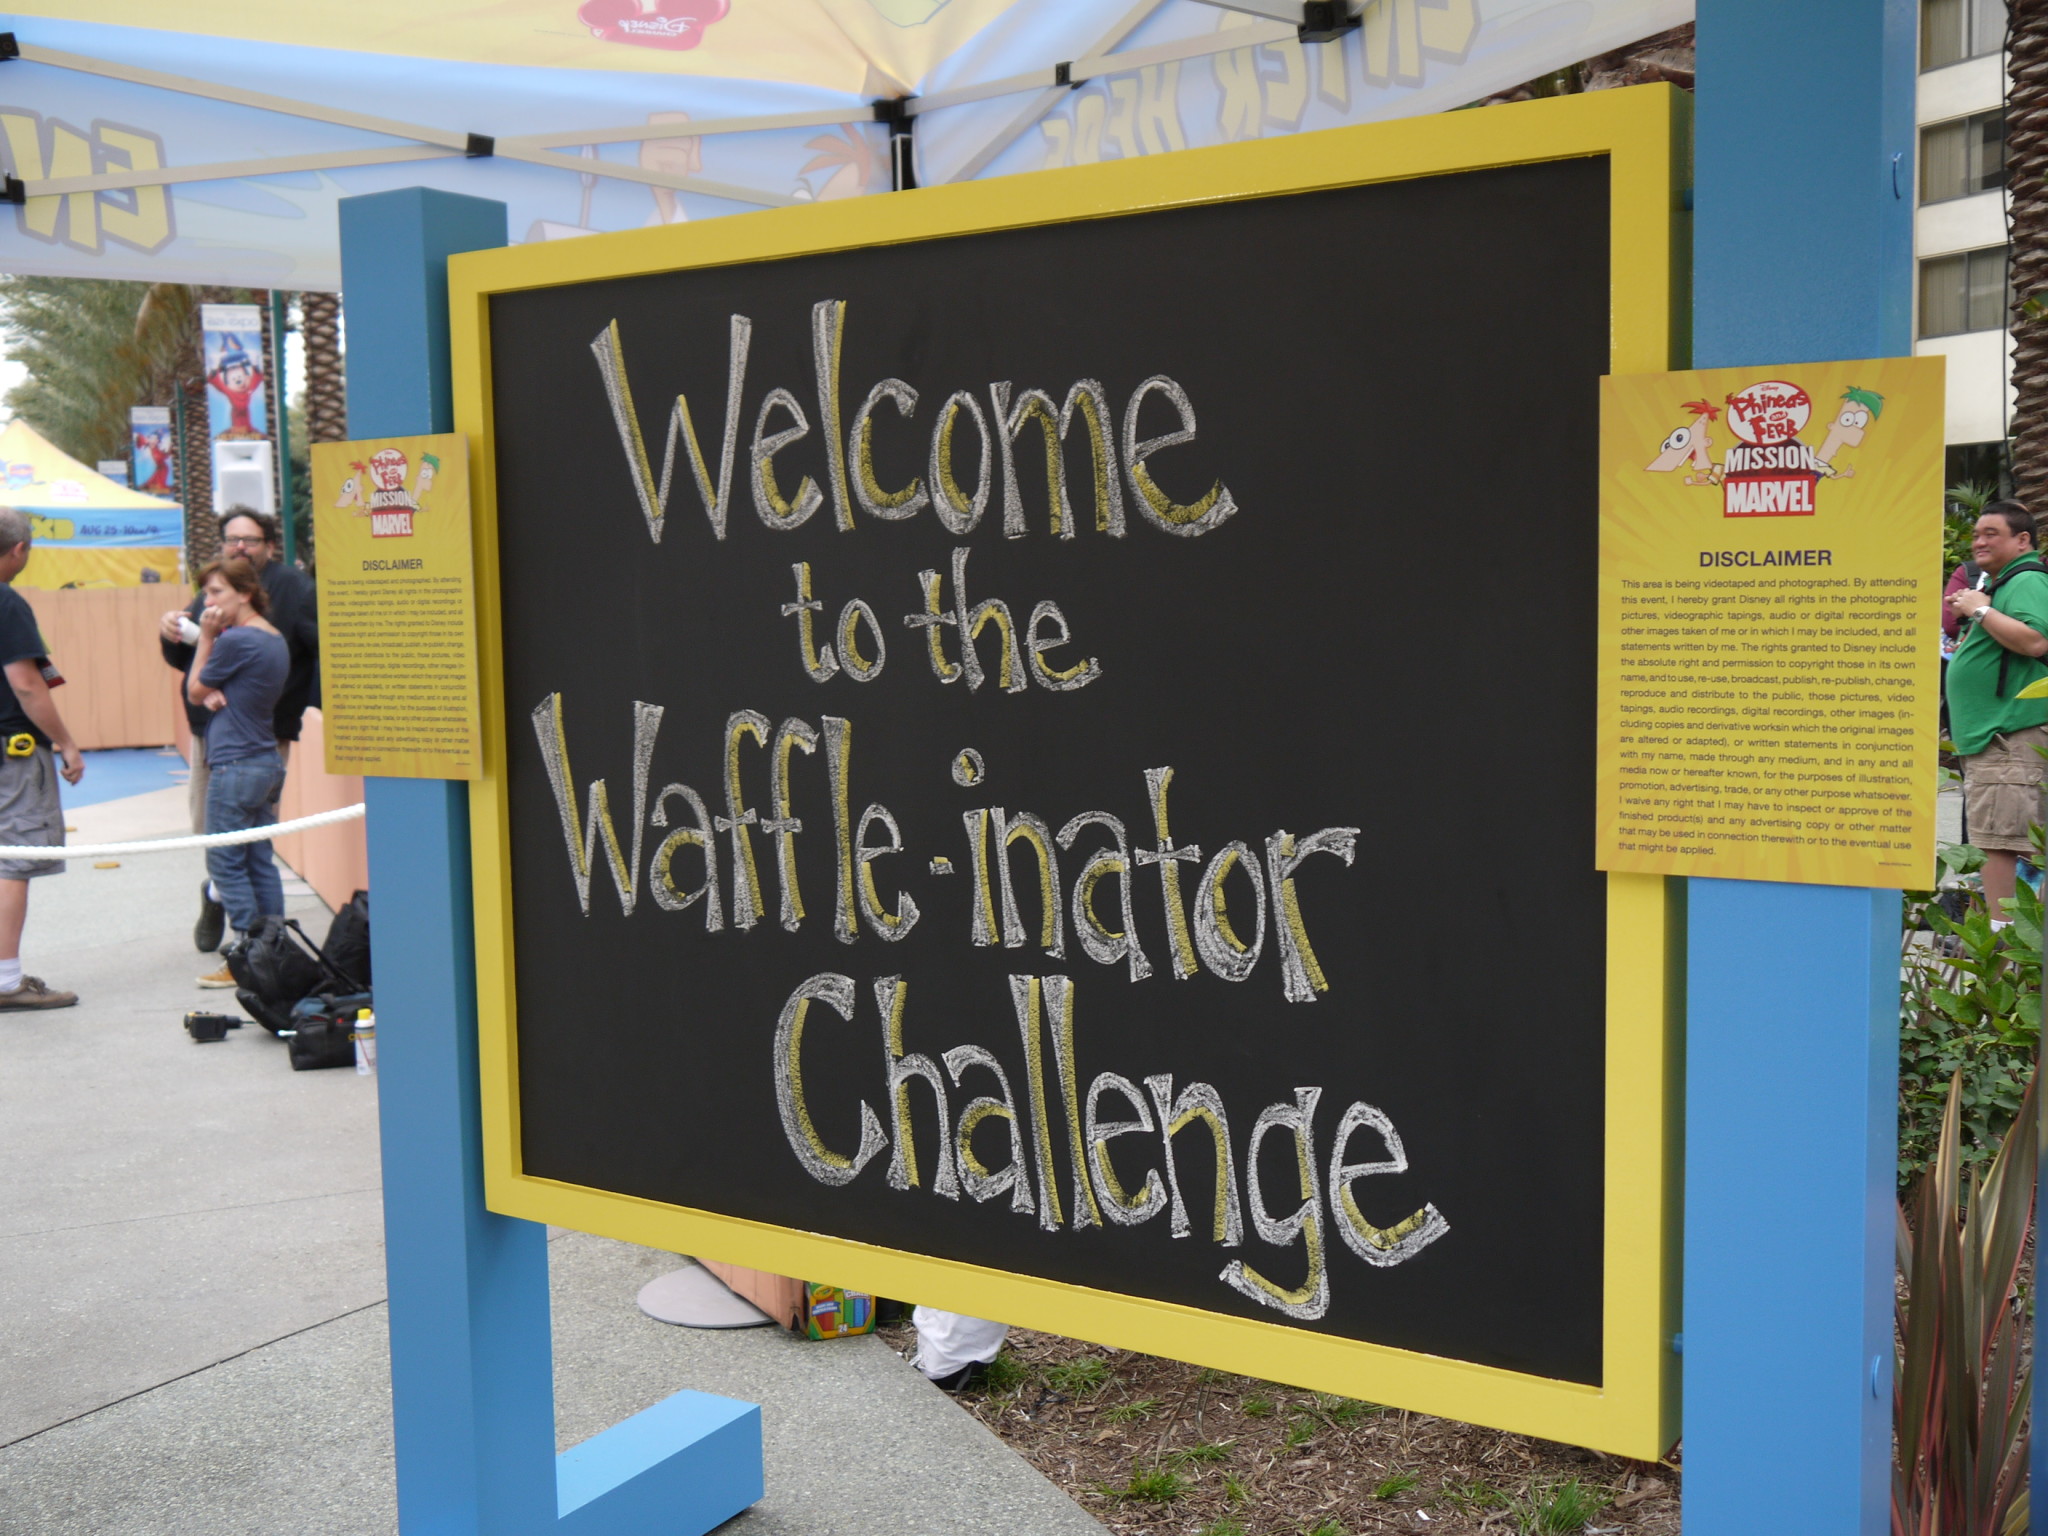 Come Take the Waffle-inator Challenge This Weekend in the Downtown Disney District at the Disneyland Resort